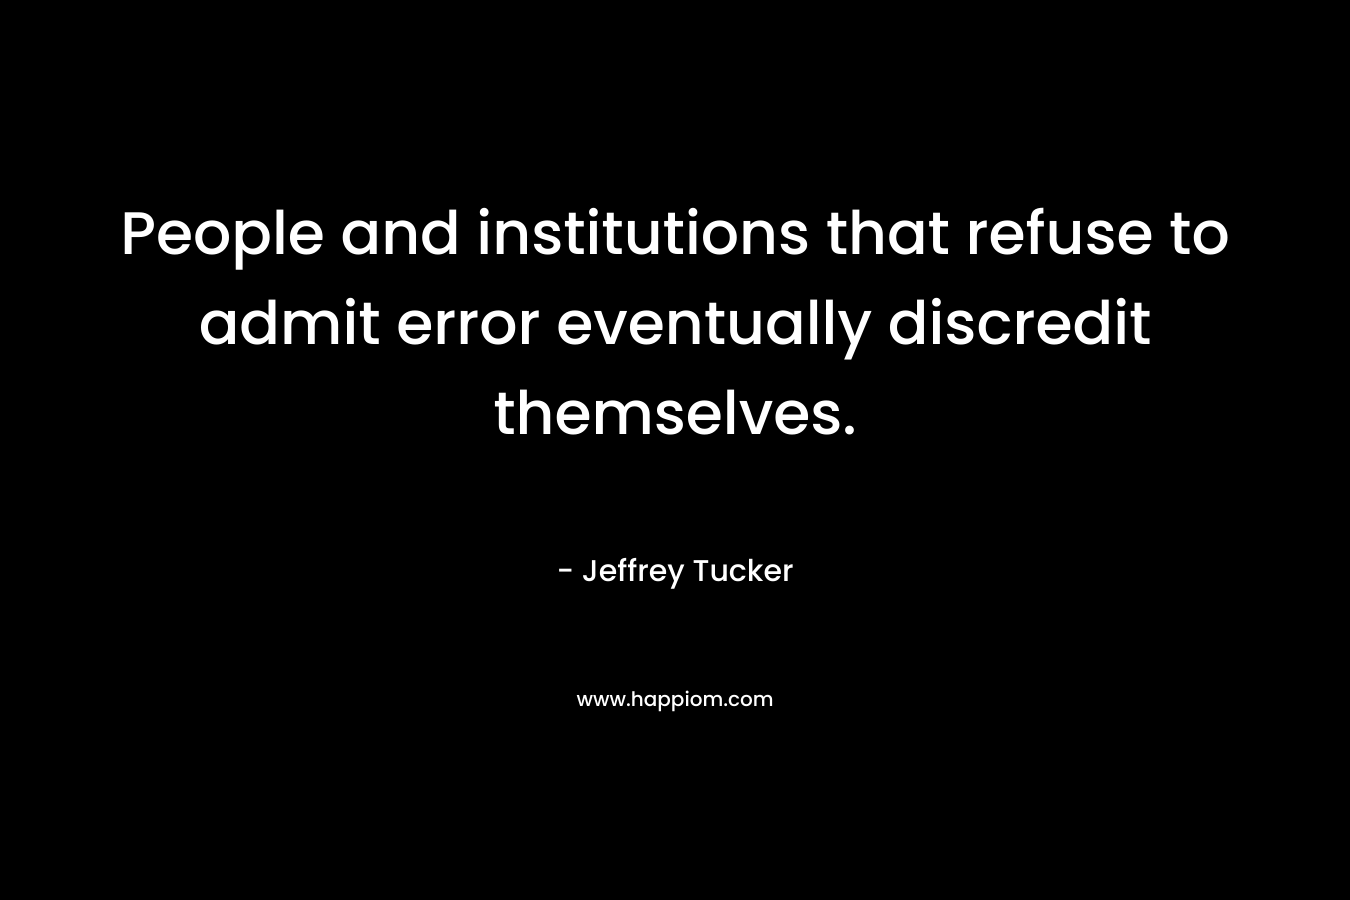 People and institutions that refuse to admit error eventually discredit themselves.